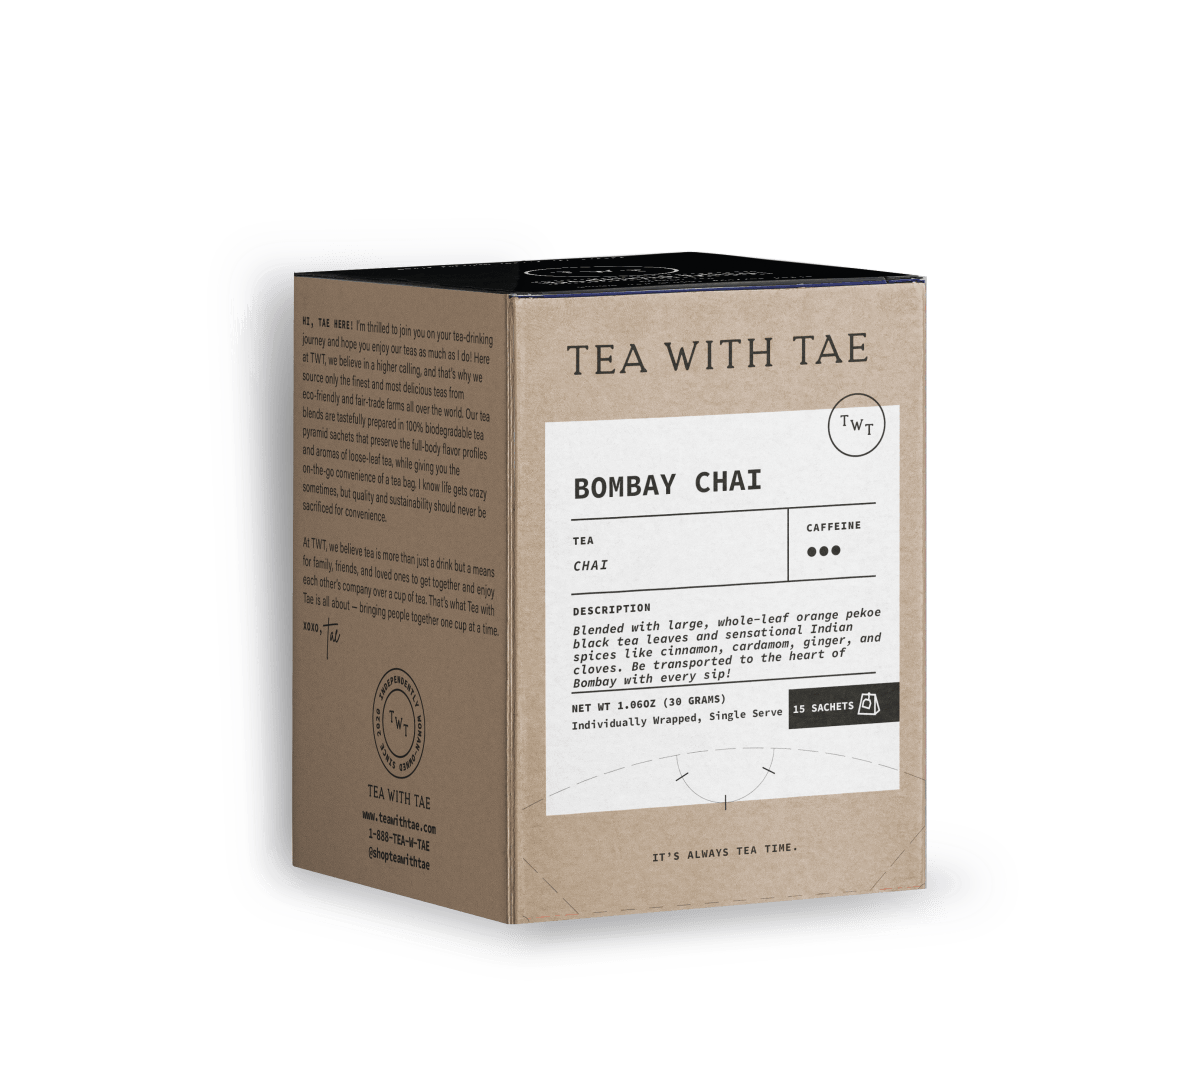 http://www.teawithtae.com/cdn/shop/products/bombay-chai-15-ct-tea-box-559133.png?v=1689229607&width=2048